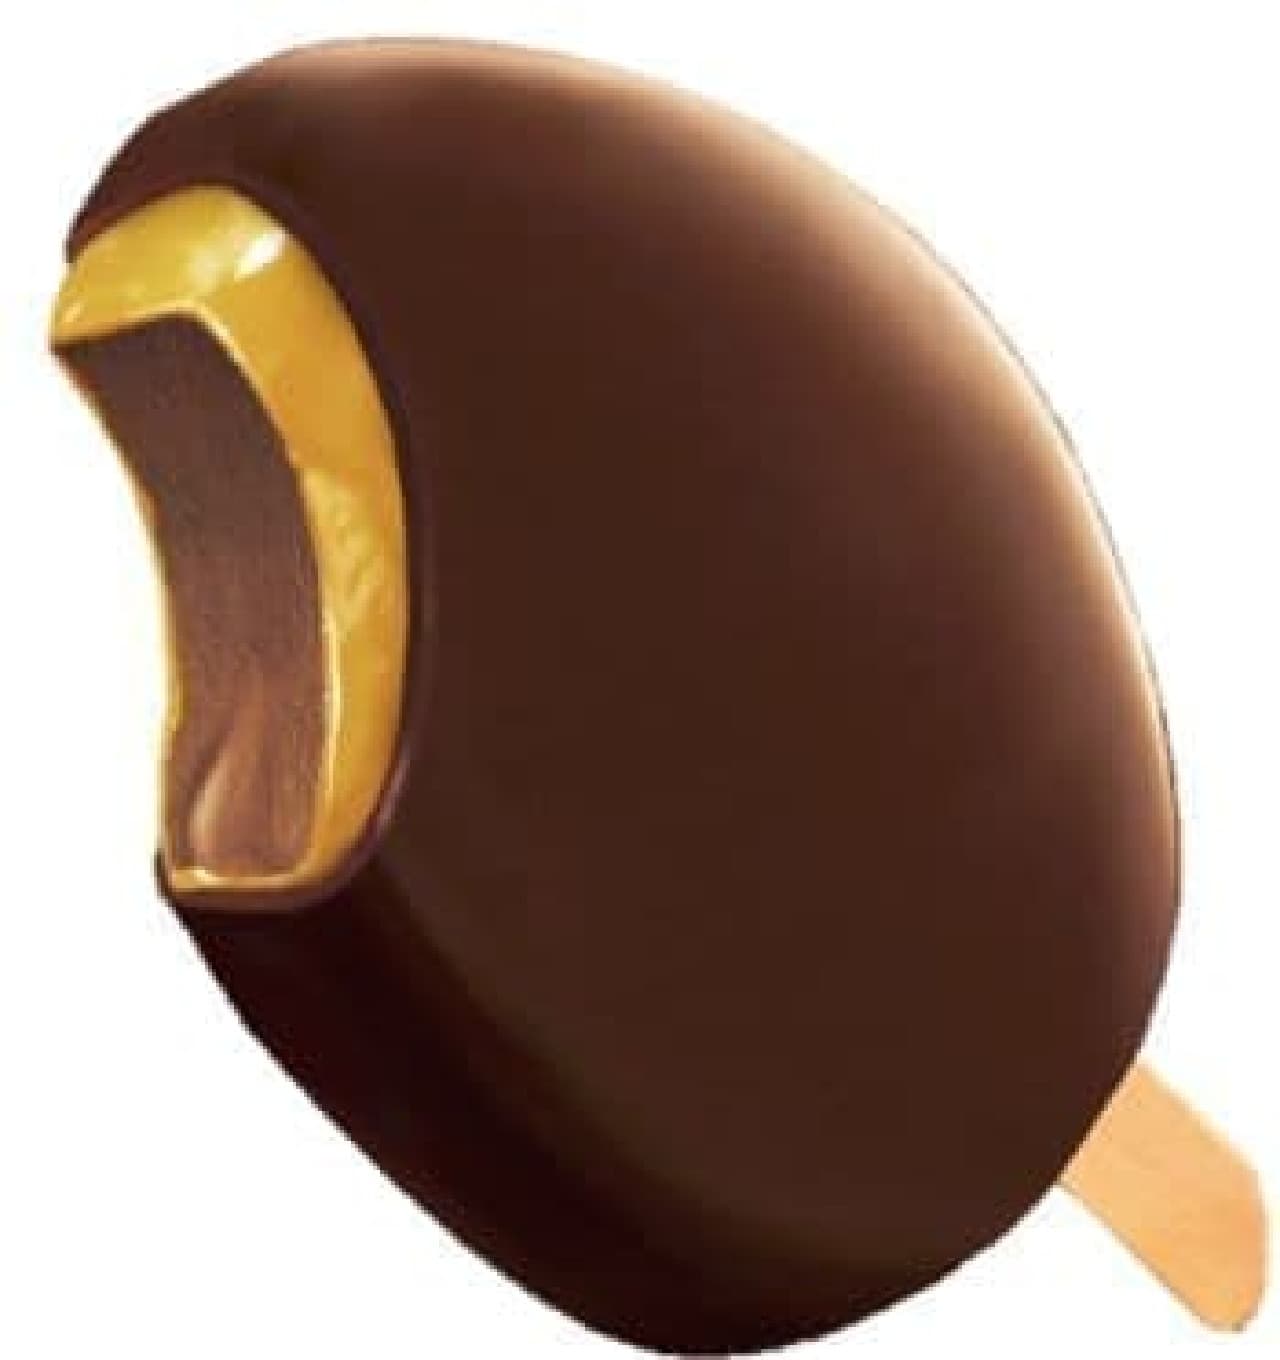 "Rich Chocolat-Champagne Tailoring-" is a bar ice cream made by coating chocolate ice cream with champagne sauce and wrapping it in chocolate.